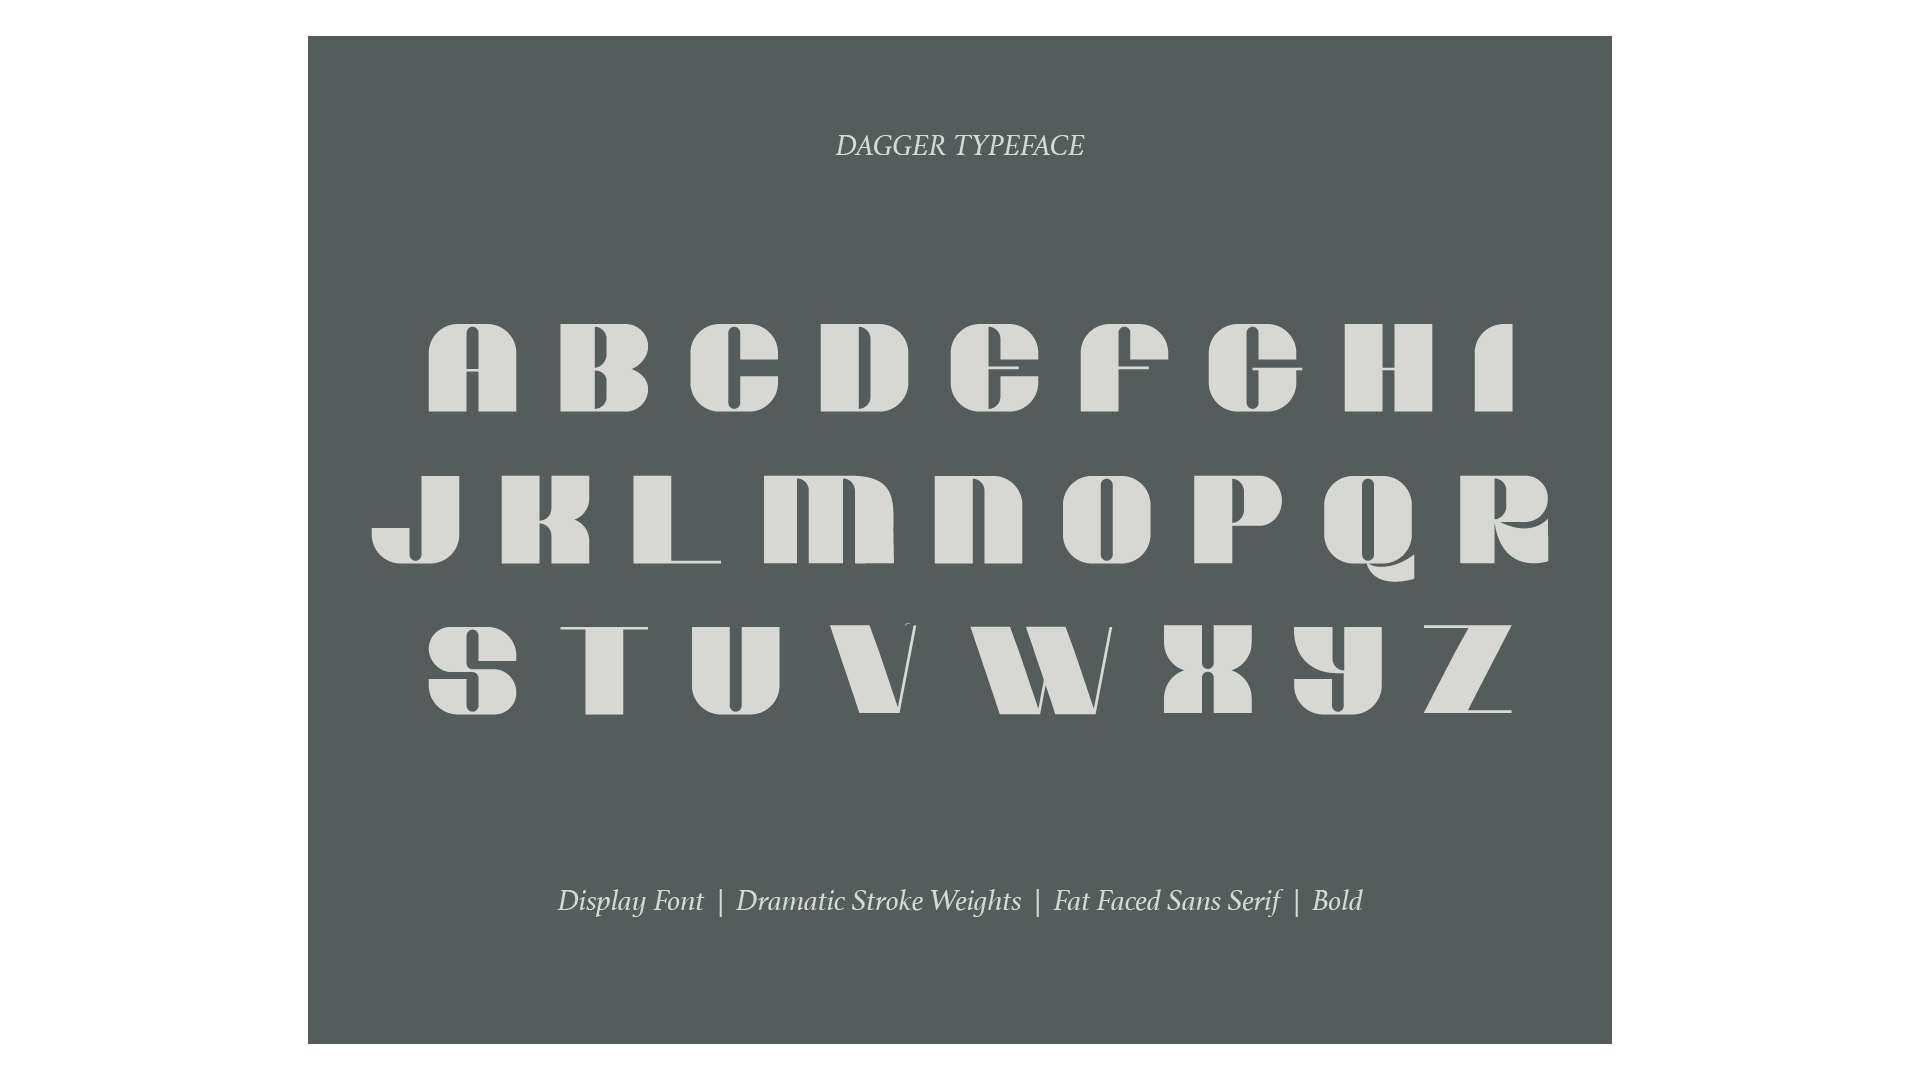 featured image two:Dagger Typeface